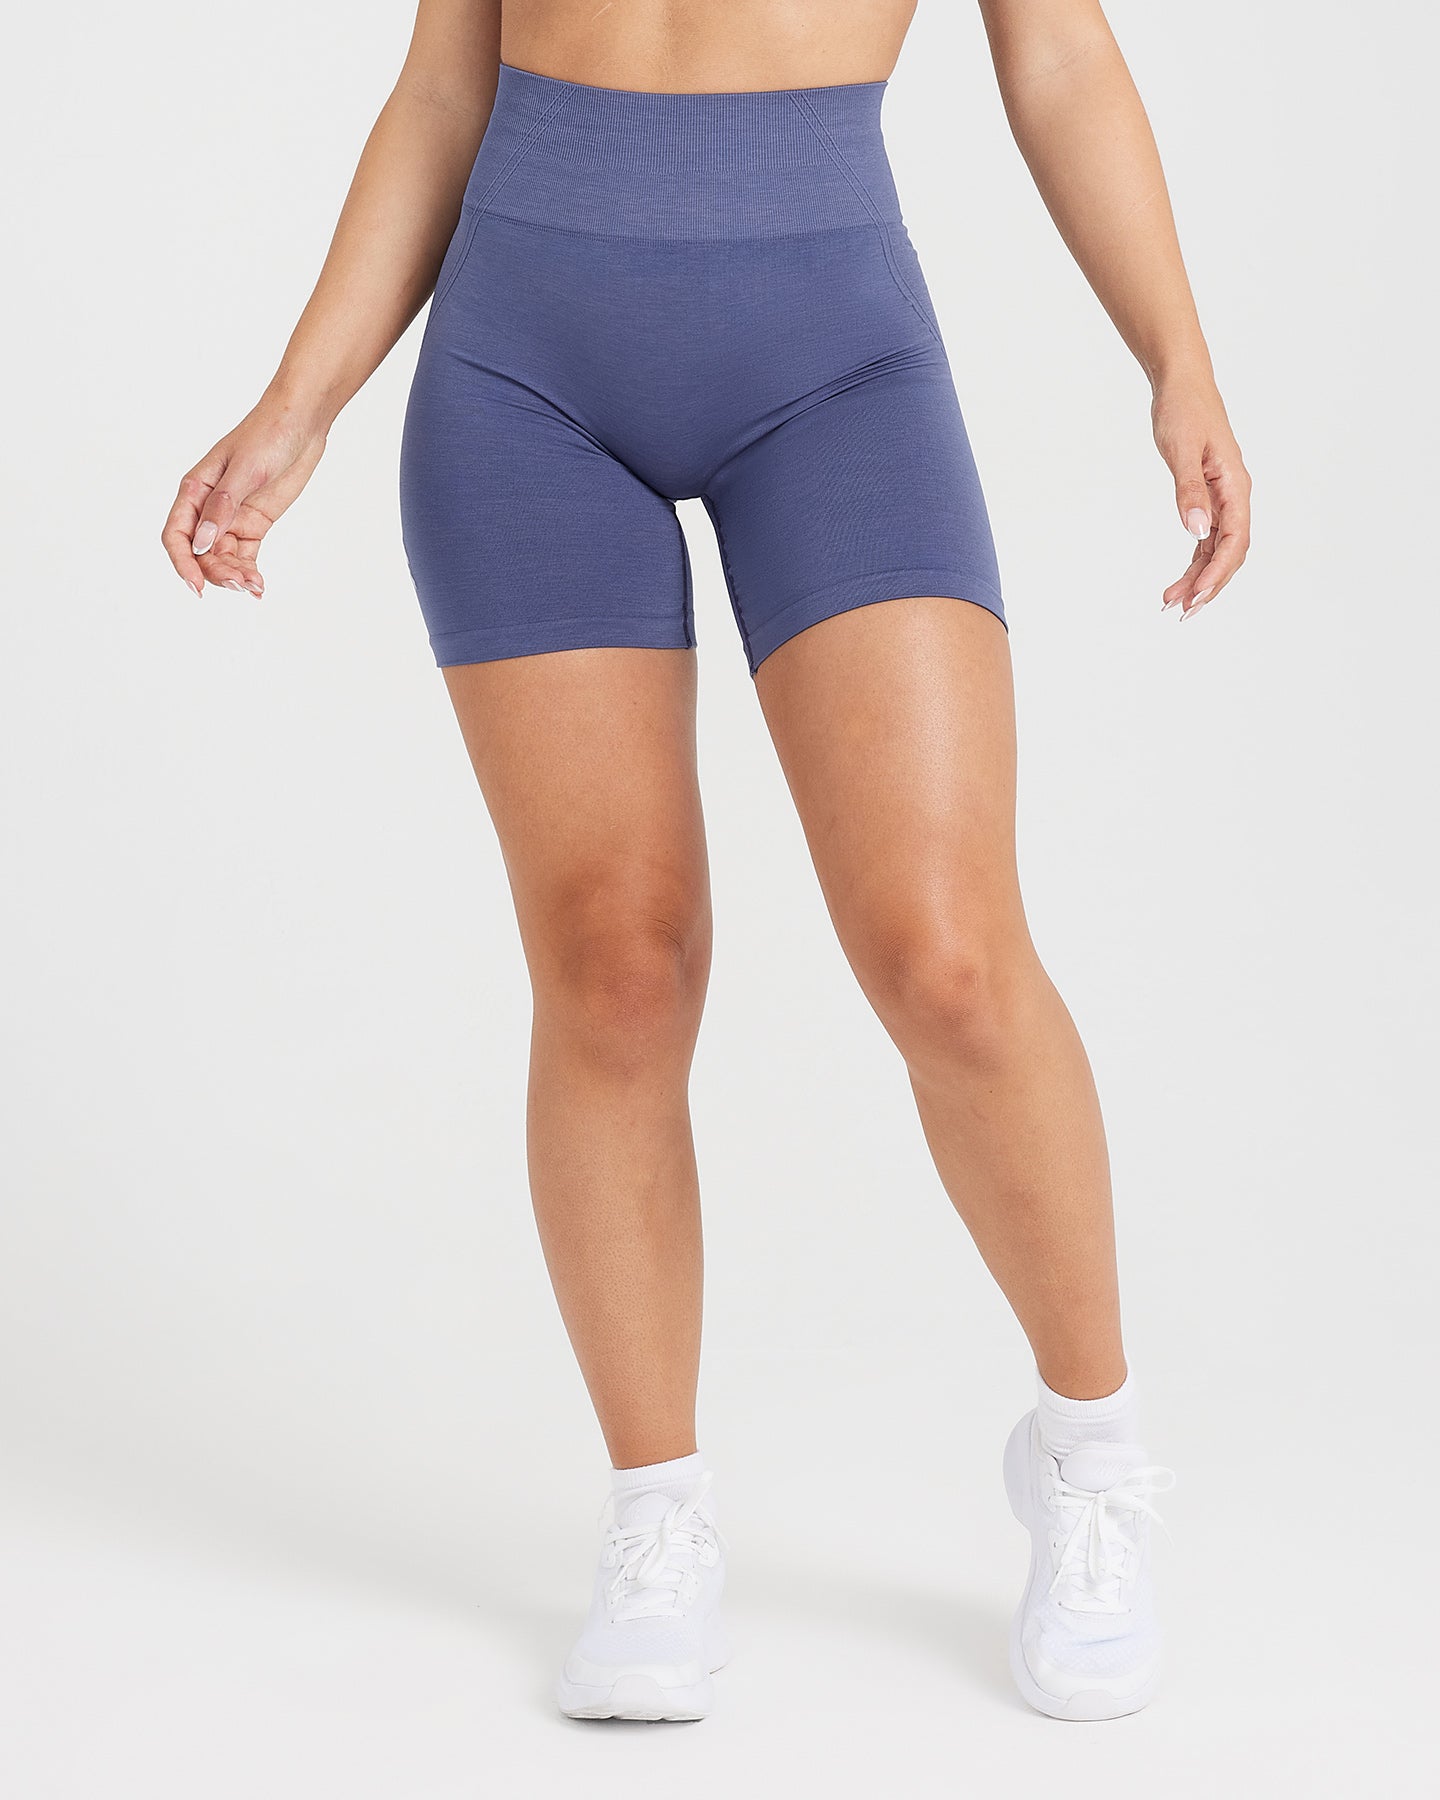 Cycling Shorts for Women - Slate Blue | Oner Active US